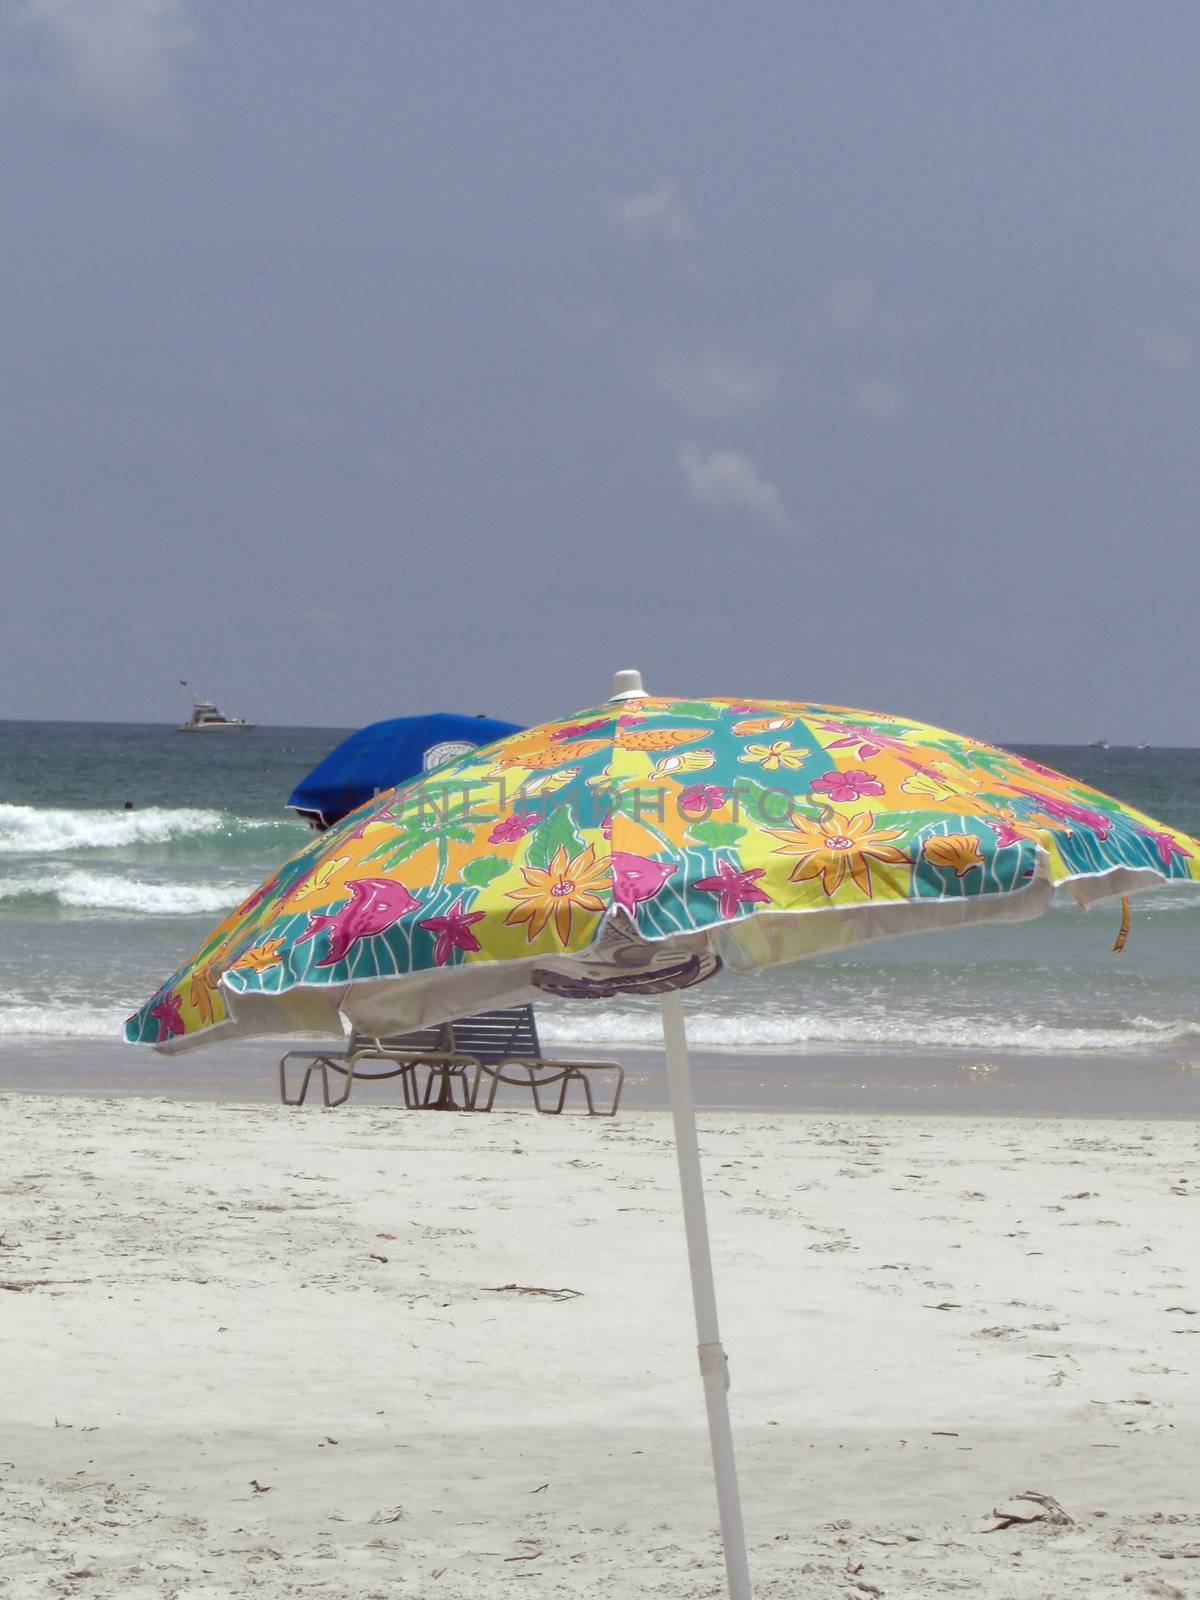 A colorful umbrella is standing in isolation at the beach.